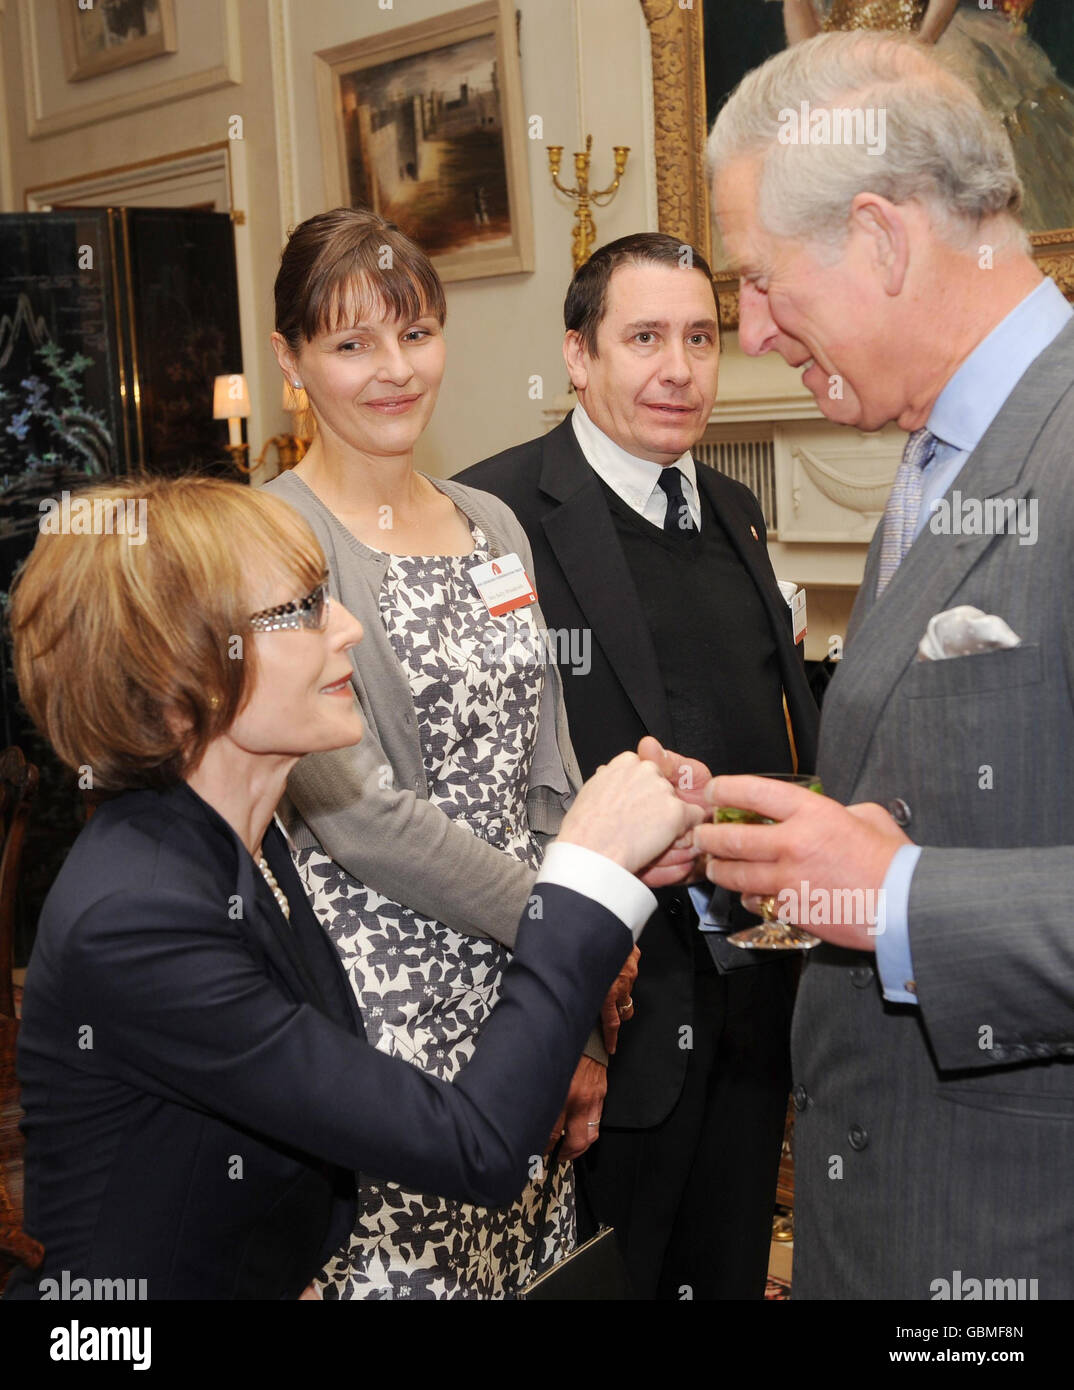 The Prince of Wales meets (left- right) Lady Victoria Getty, Sally Woodcock and Jools Holland at Clarence House in London where he hosted a reception to mark the 40th anniversary of the Churches Conservation Trust. Stock Photo